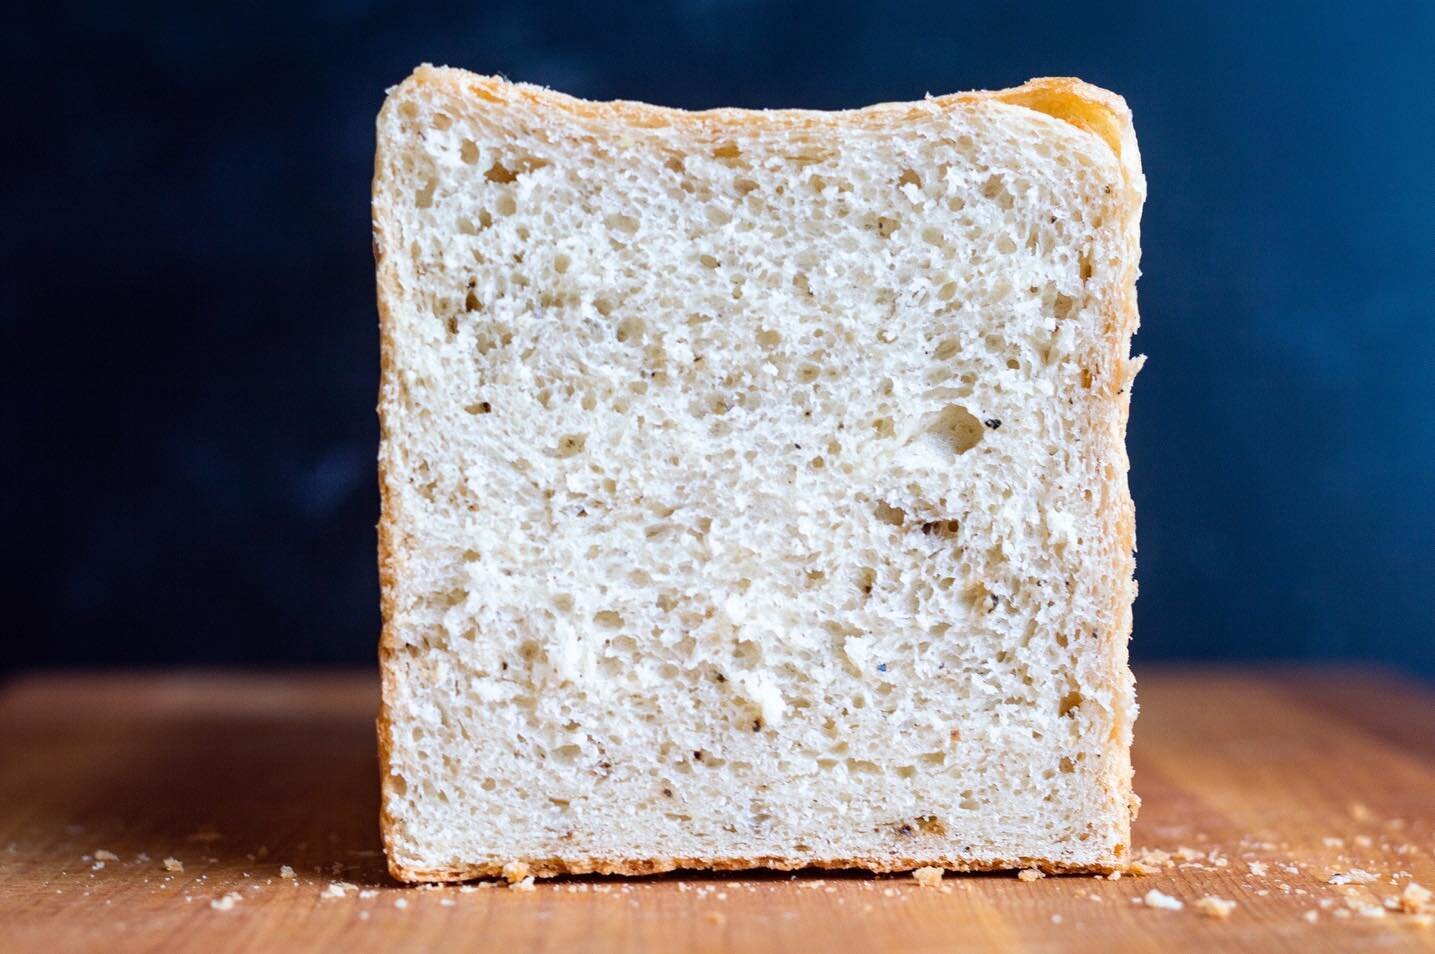 Cracked Black Pepper Pain de Mie. My new favorite way to make this soft buttery bread.  The black pepper gives it a spice and warmth that makes it hard to eat just one slice.  This is a King Arthur baking company recipe, that I adapted based on what 